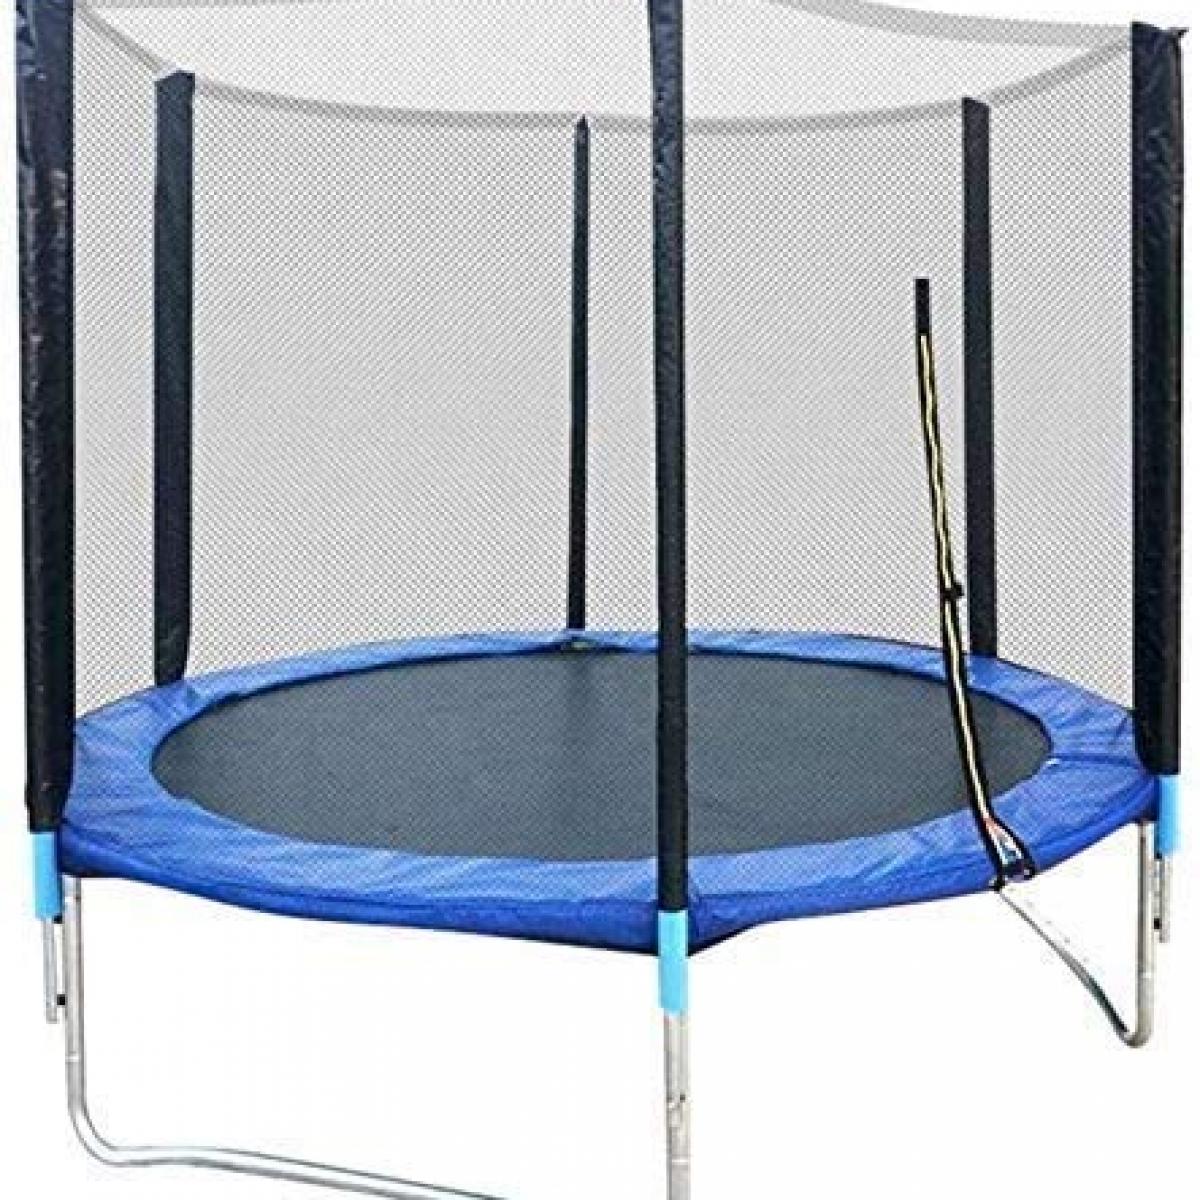 MiBo Trampoline 8ft Net Spring Protection Ladder For Gymnastic Jumping - Blue